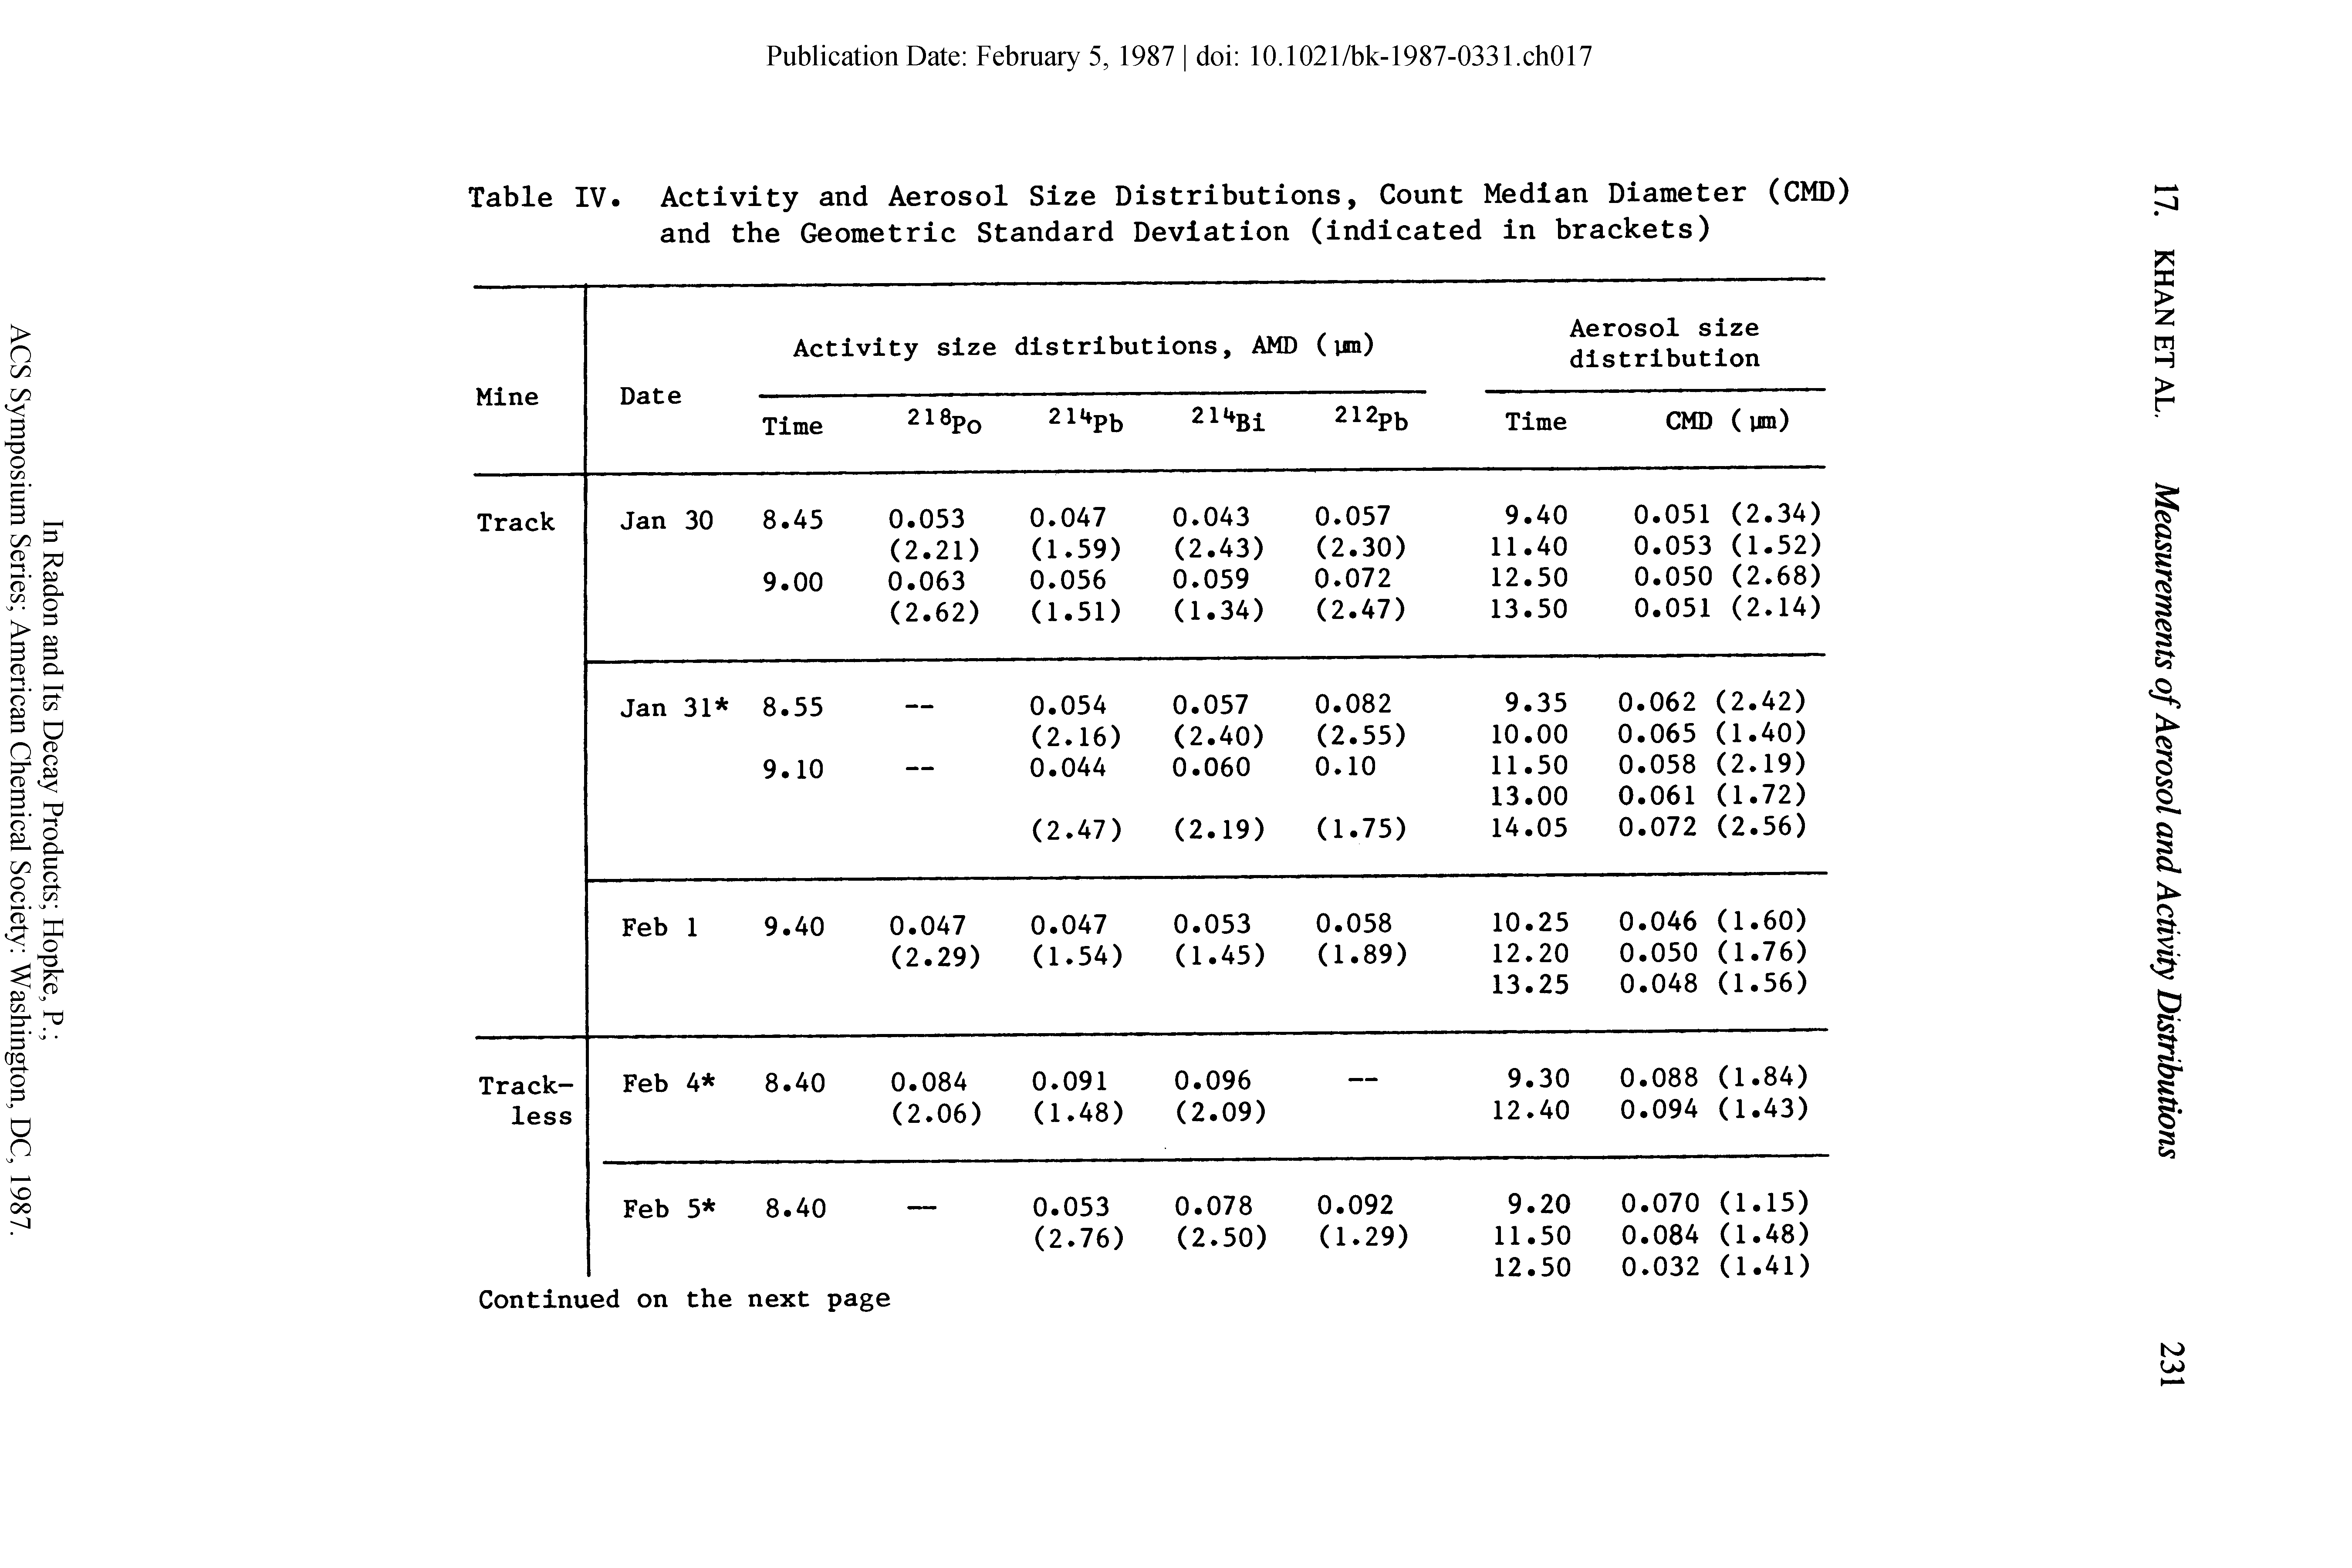 Table IV. Activity and Aerosol Size Distributions, Count Median Diameter (CMD) and the Geometric Standard Deviation (indicated in brackets)...